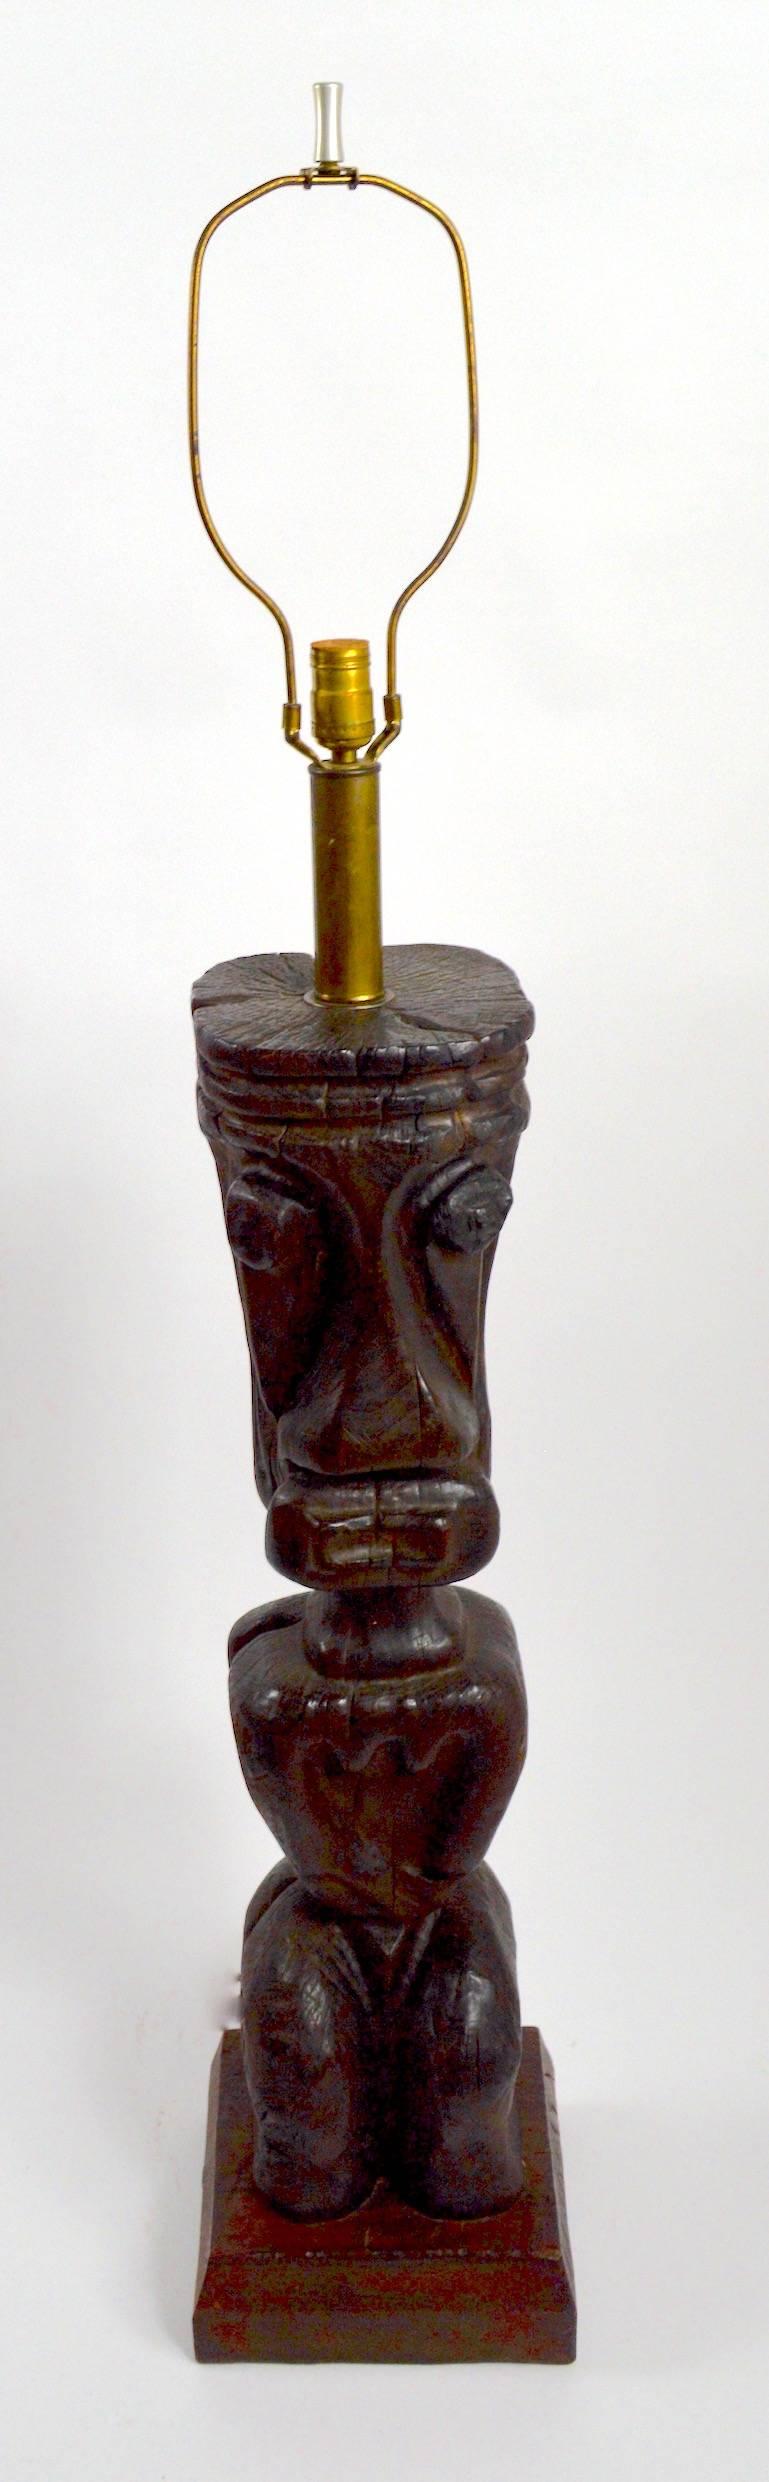 Large-scale carved wood Tiki lamp designed by William Westenhaver for Witco.